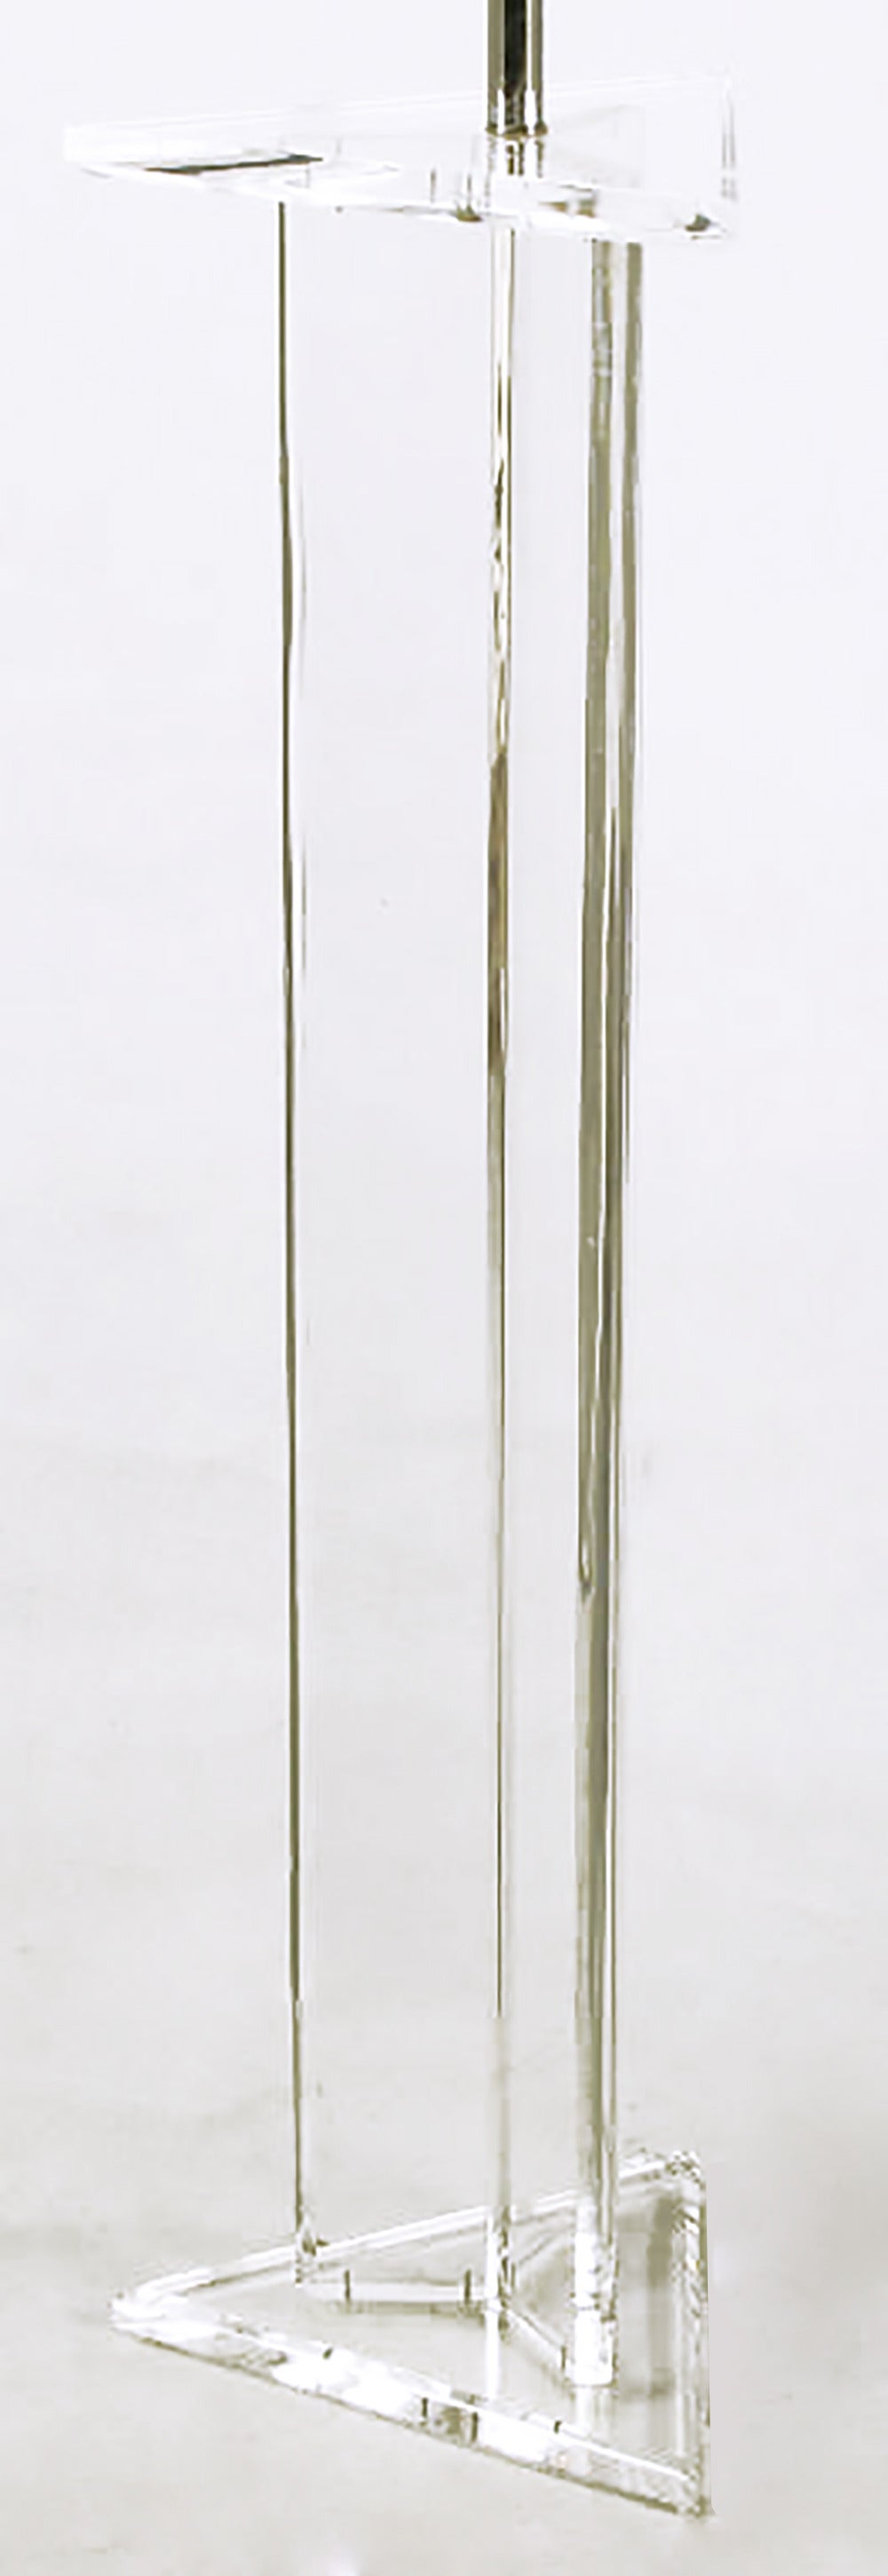 Triangular bevelled Lucite base and cap floor lamp with three-part trefoil Lucite body. Chrome stem and socket. Sold sans shade.